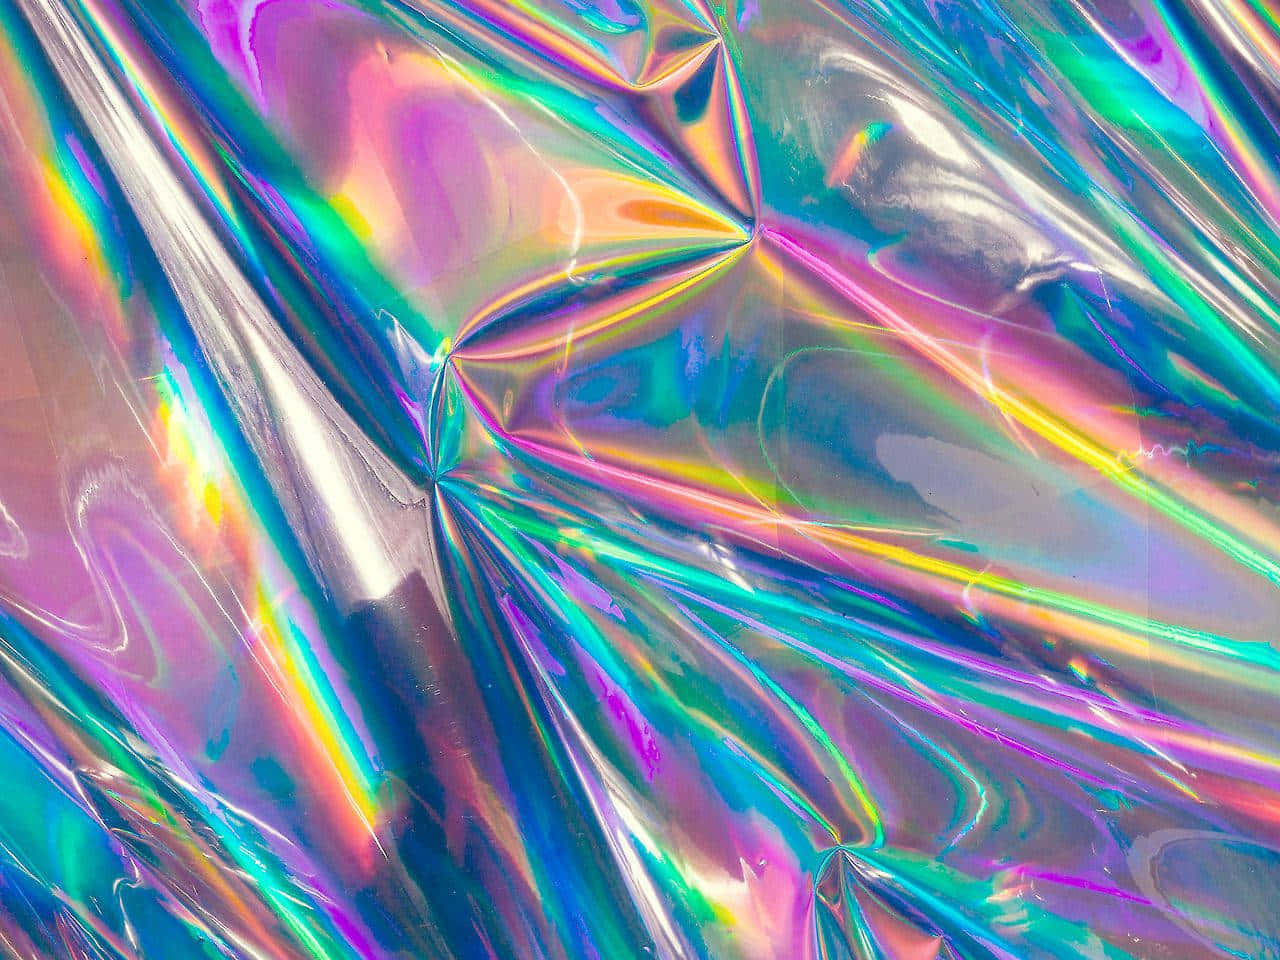 A Close Up Of A Shiny Holographic Fabric Wallpaper